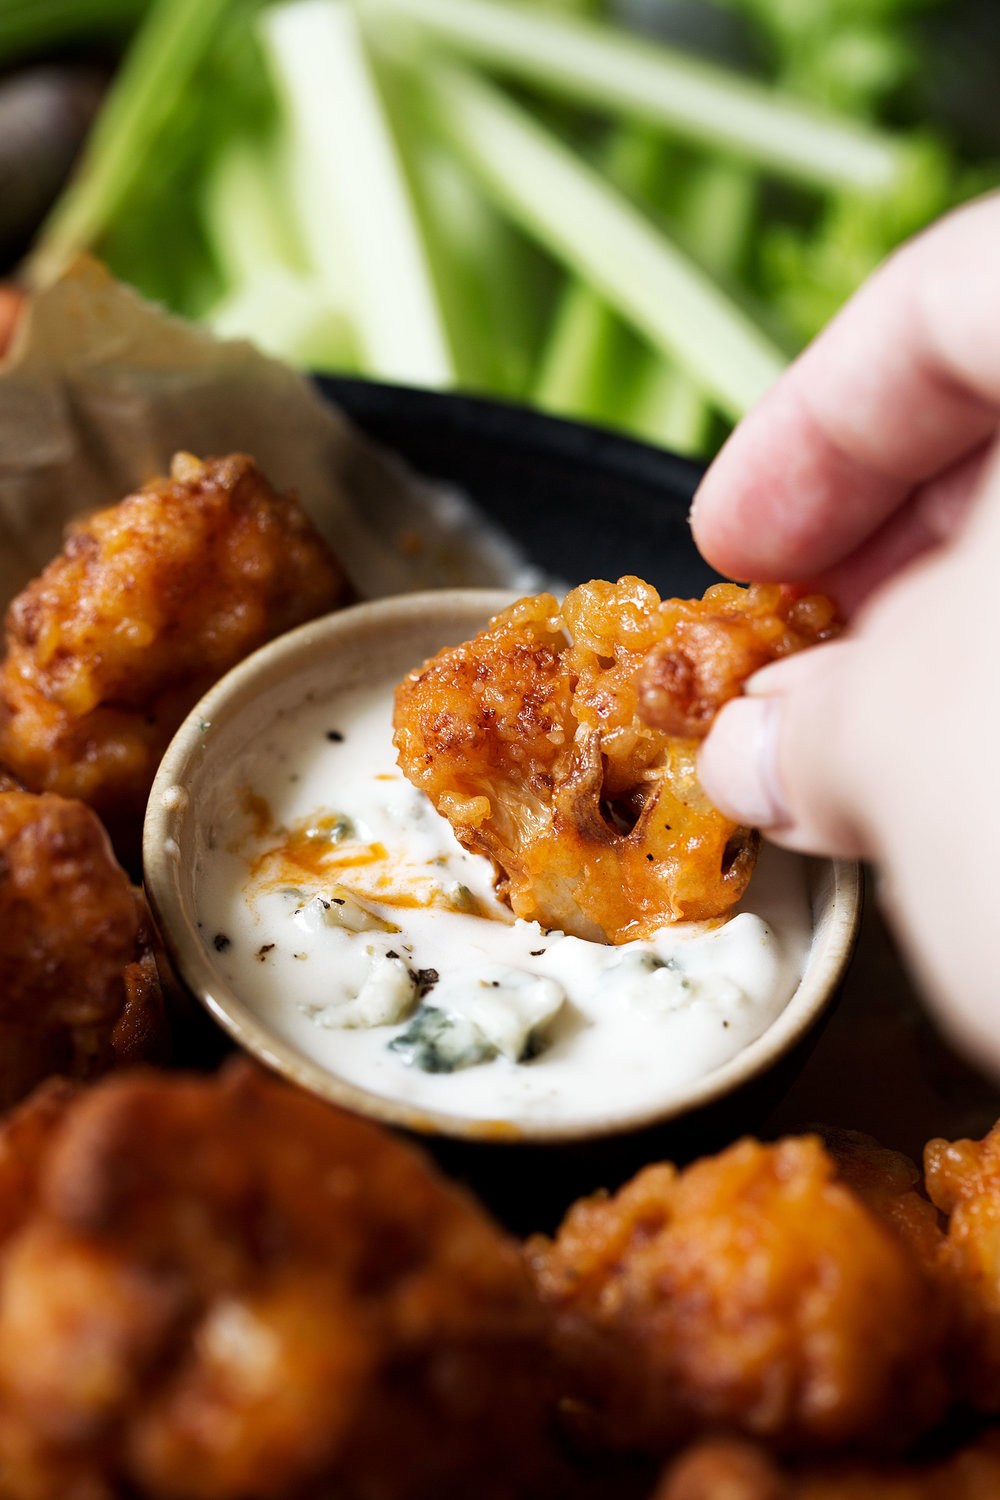 Crispy battered and fried cauliflower bites tossed in homemade buffalo sauce are a great vegetarian alternative to buffalo chicken wings